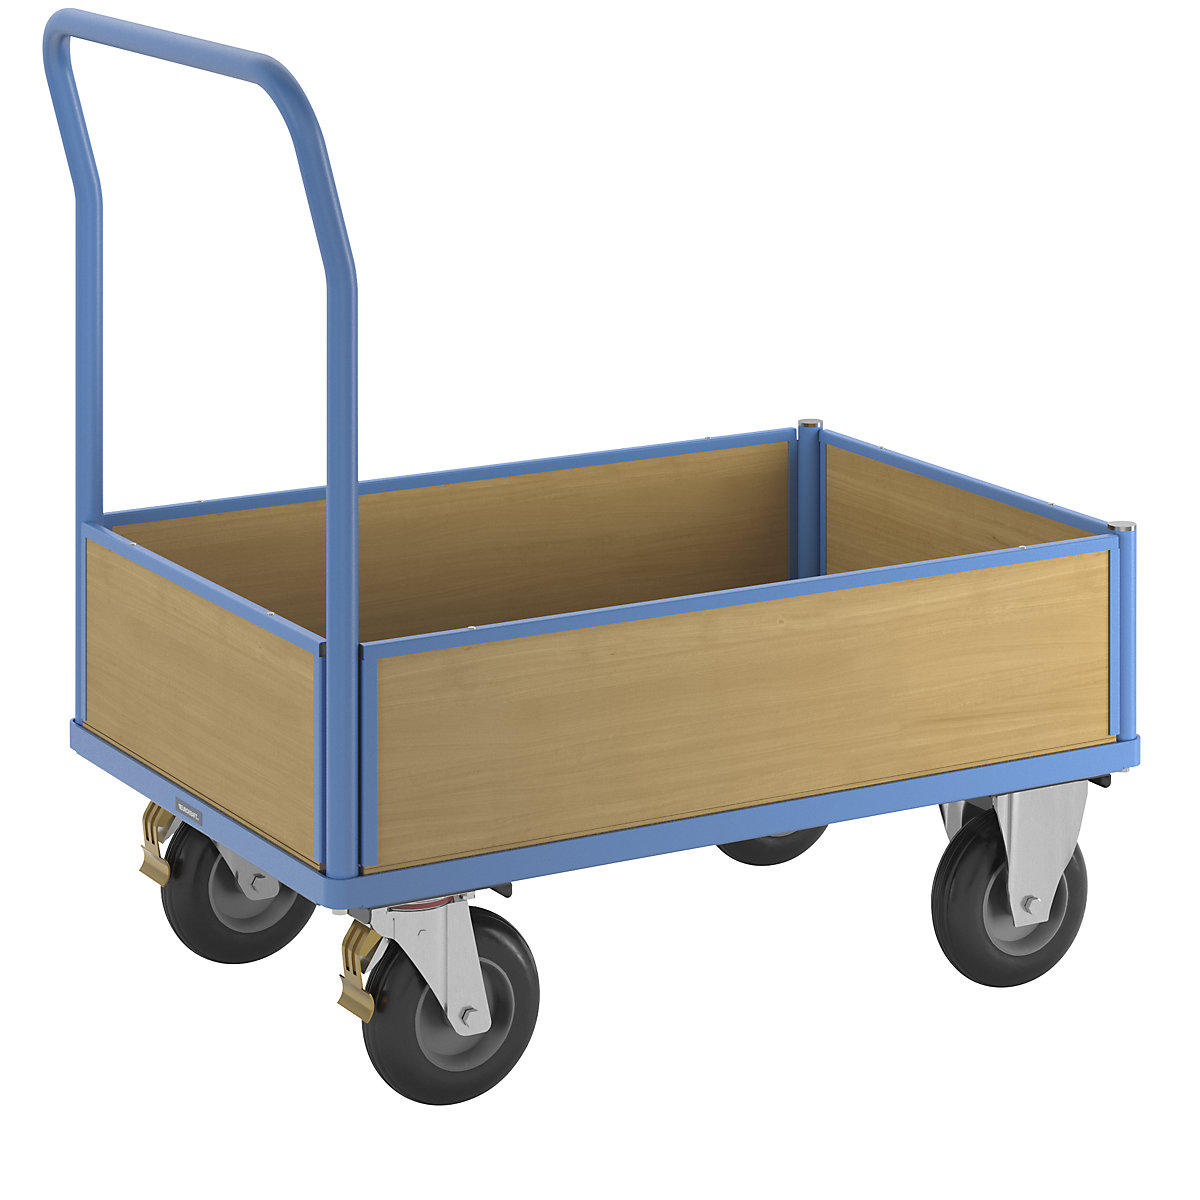 Platform truck with wooden panels – eurokraft pro, with 4 half height side panels, LxW 1050 x 700 mm, pneumatic tyres-12